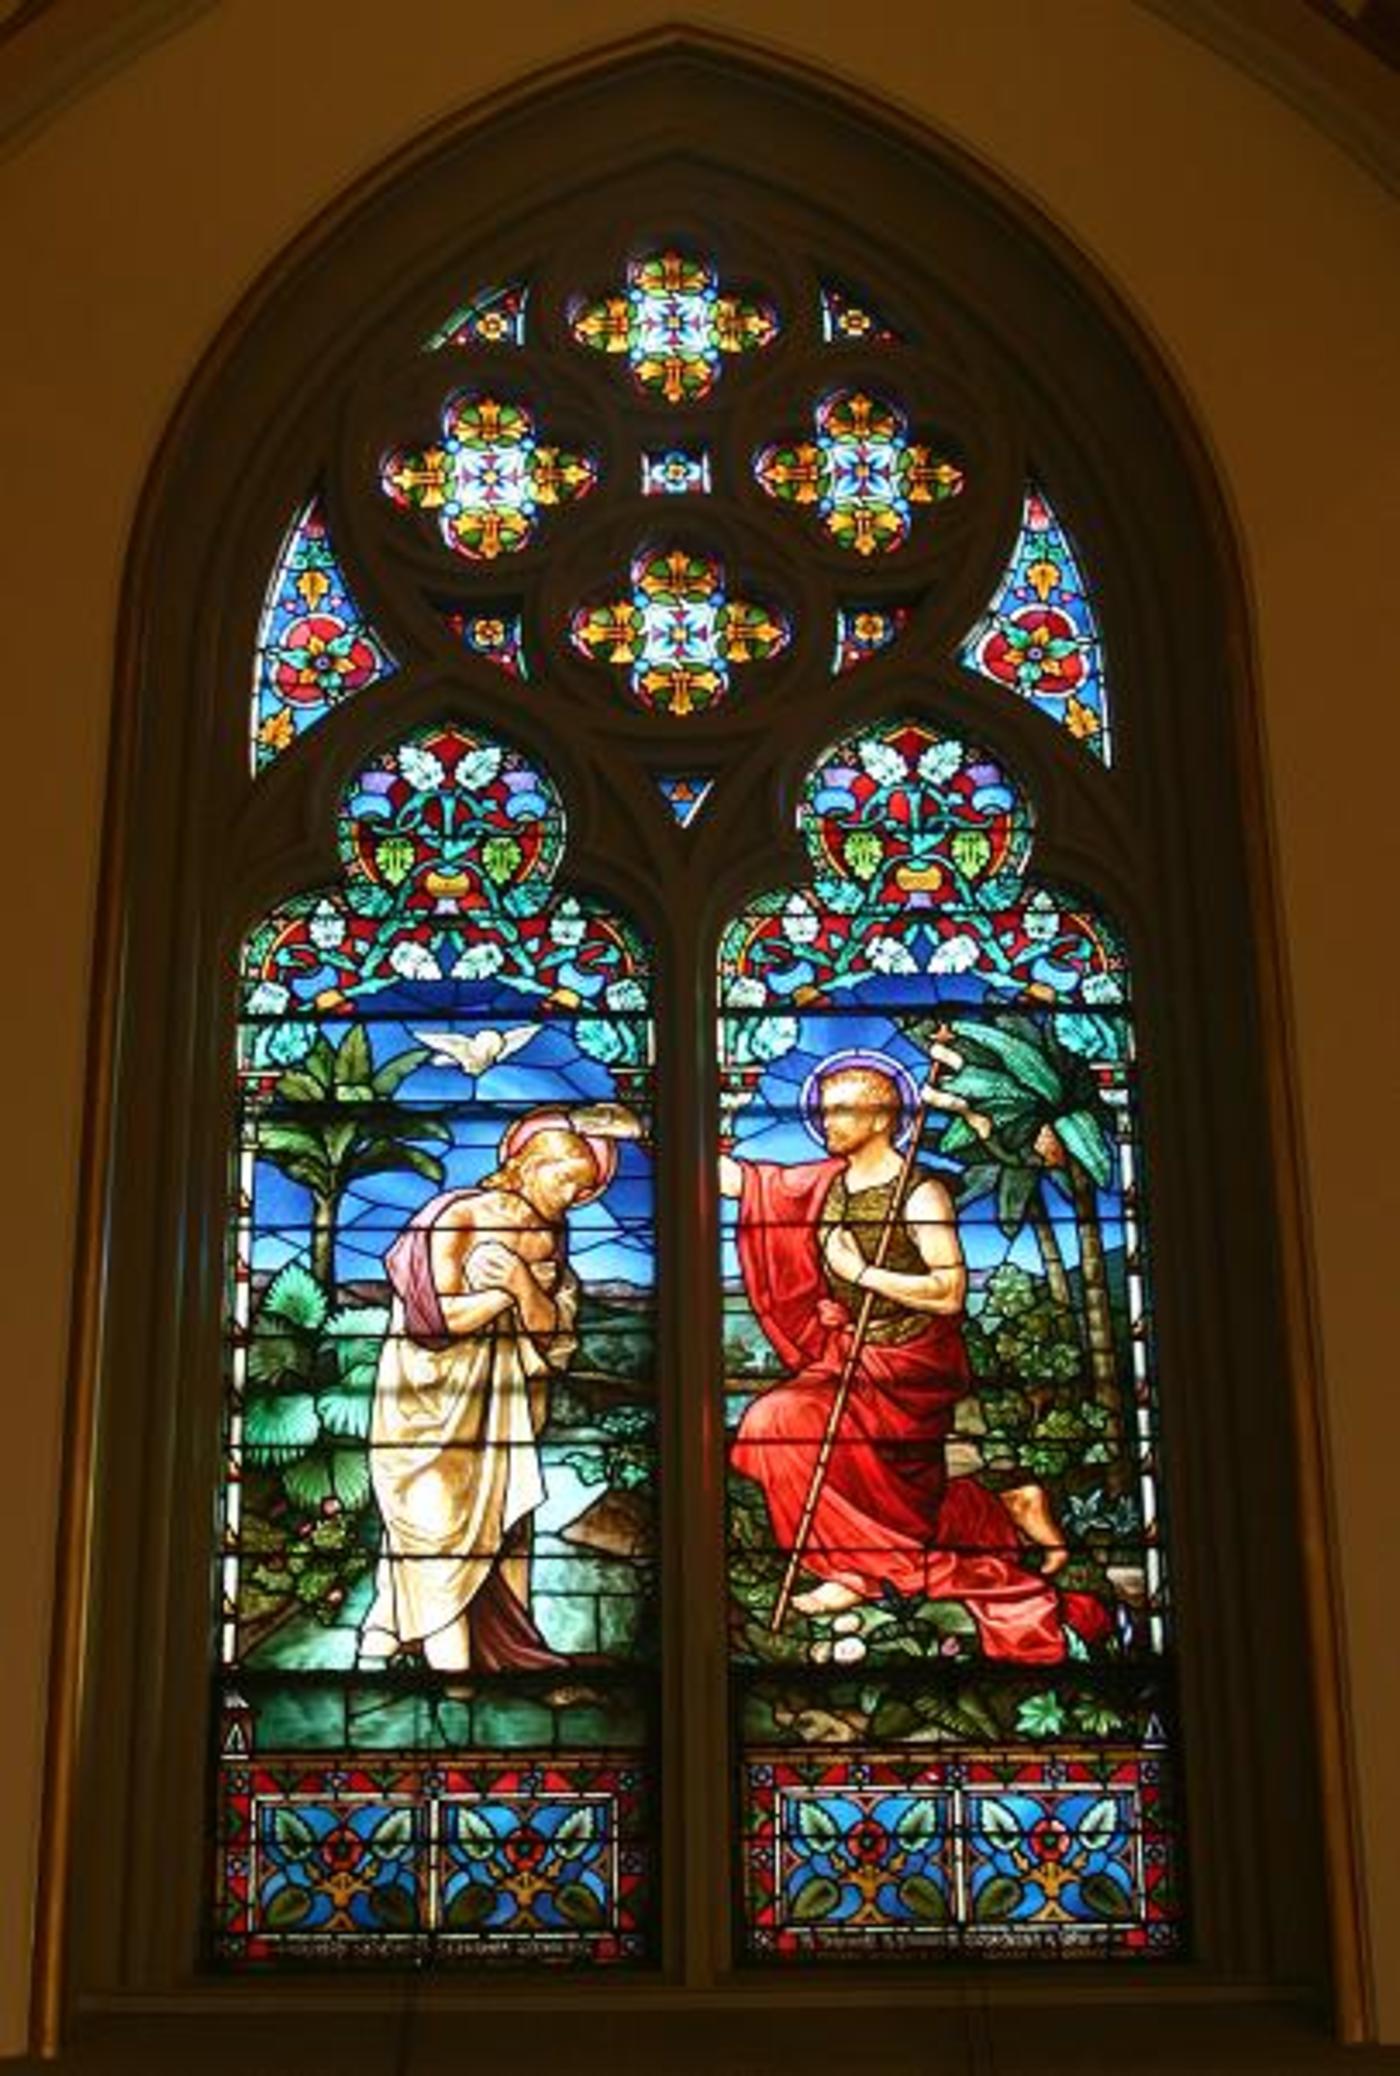 Windows 5A and 5B: The Baptism of Jesus by St. John the Baptist